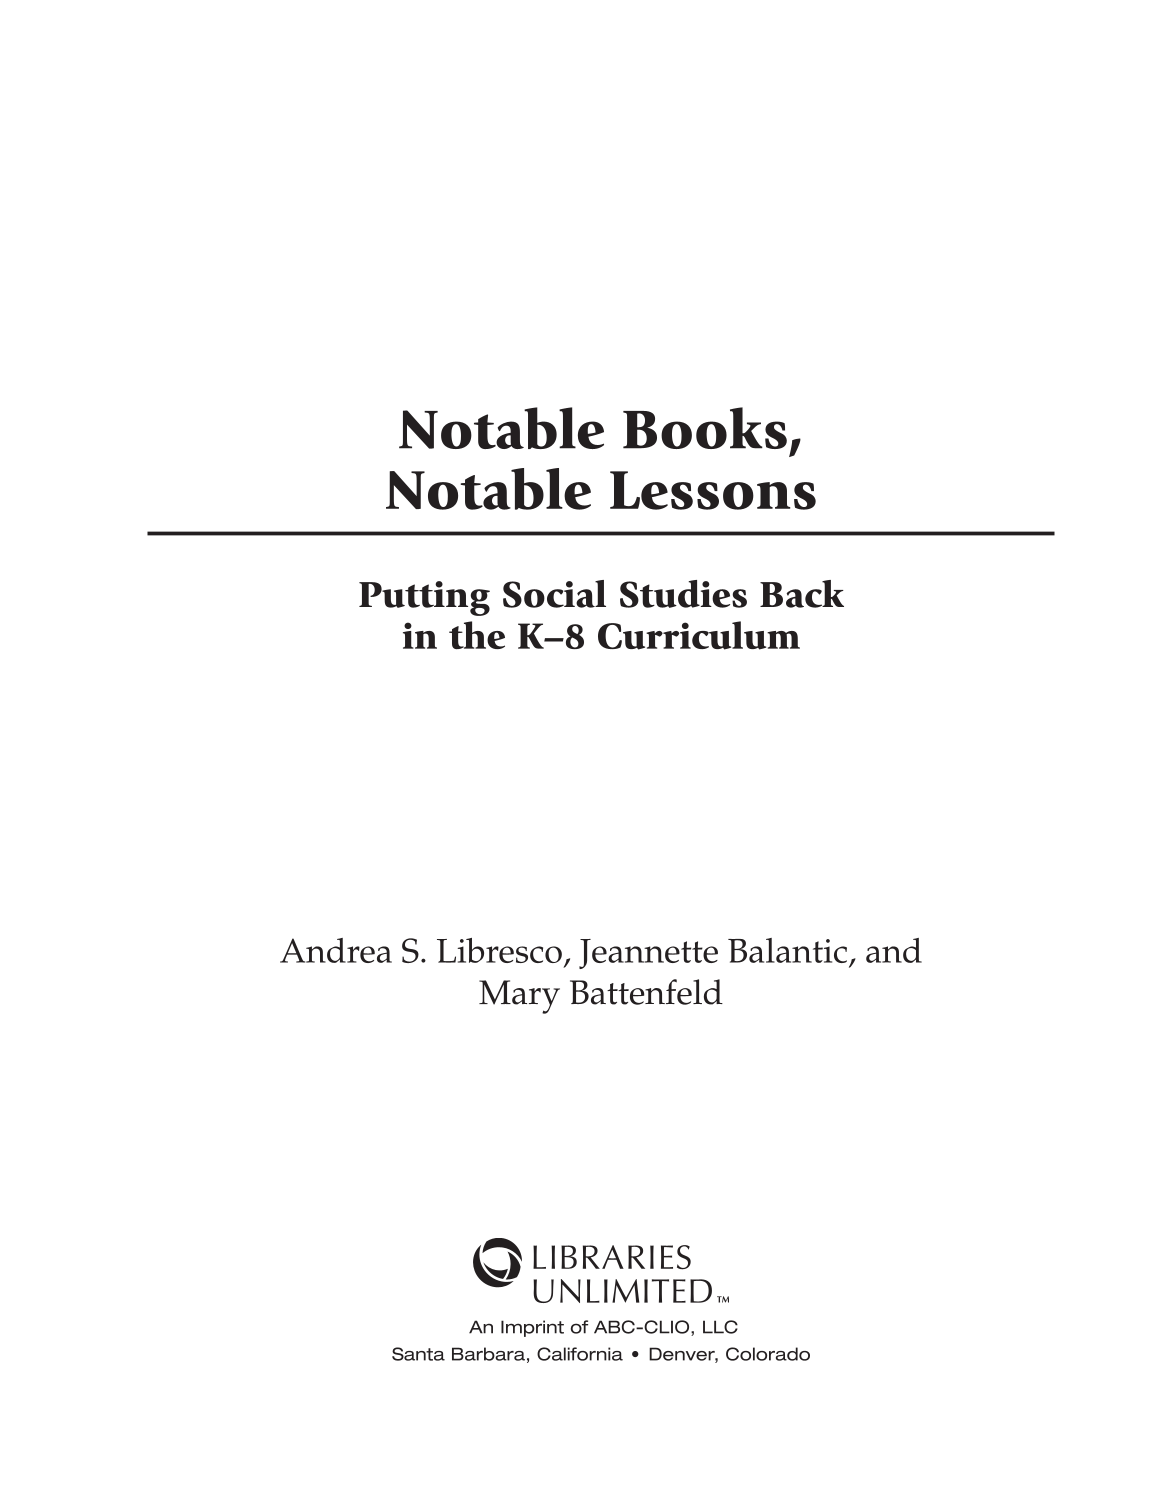 Notable Books, Notable Lessons: Putting Social Studies Back in the K-8 Curriculum page iii